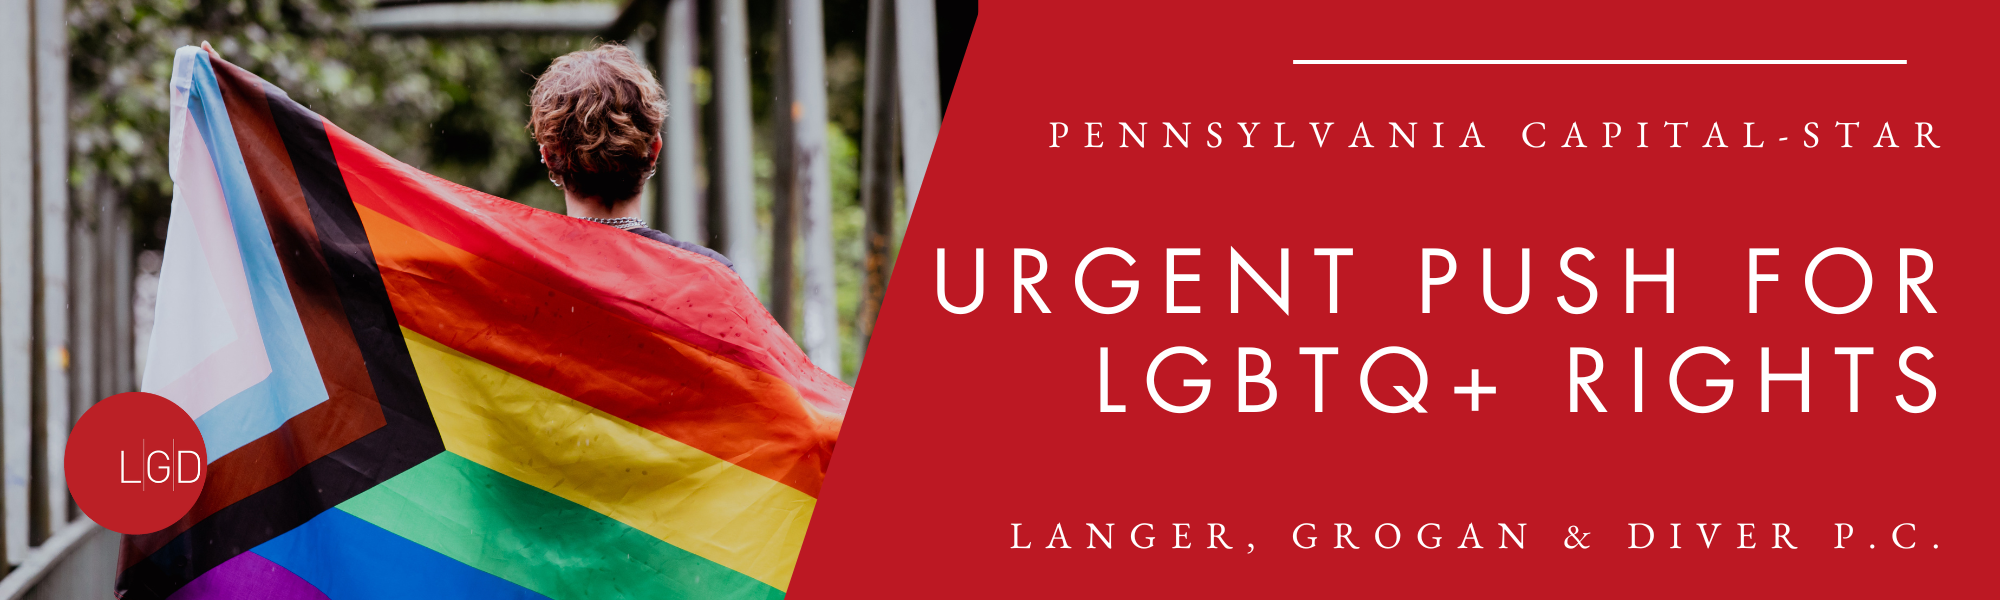 Decorative image of blond person holding the LGBTQIA+ flag on a text banner that says "Urgent Push for LGBTQ+ Rights" with Langer, Grogan & Diver branding.